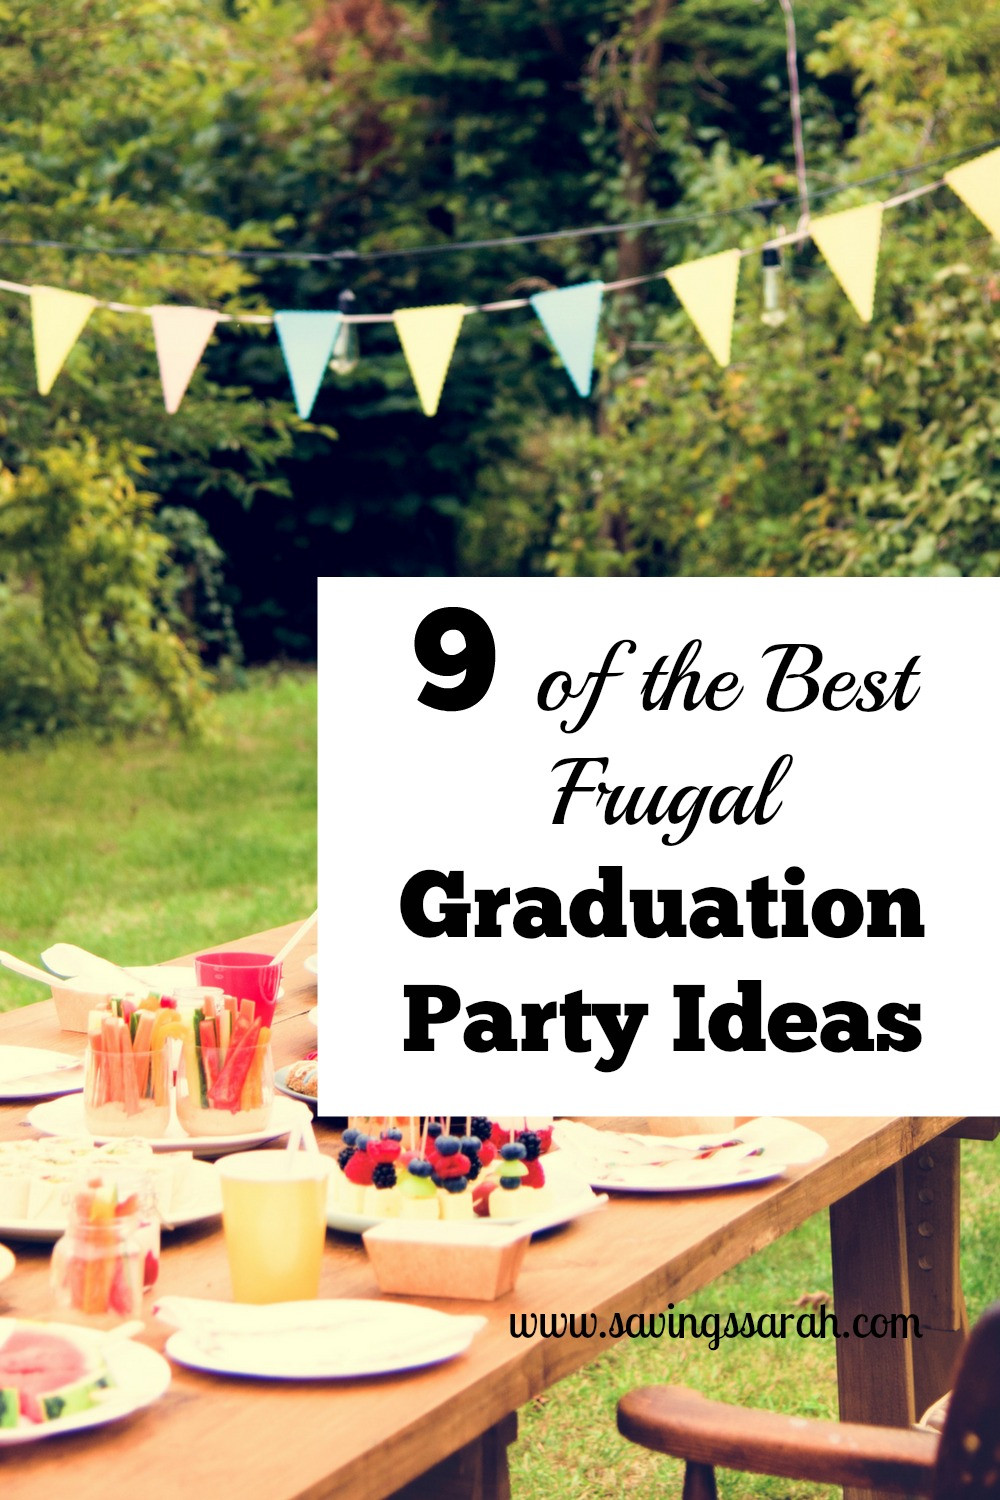 Frugal Graduation Party Ideas
 9 the Best Frugal Graduation Party Ideas Earning and